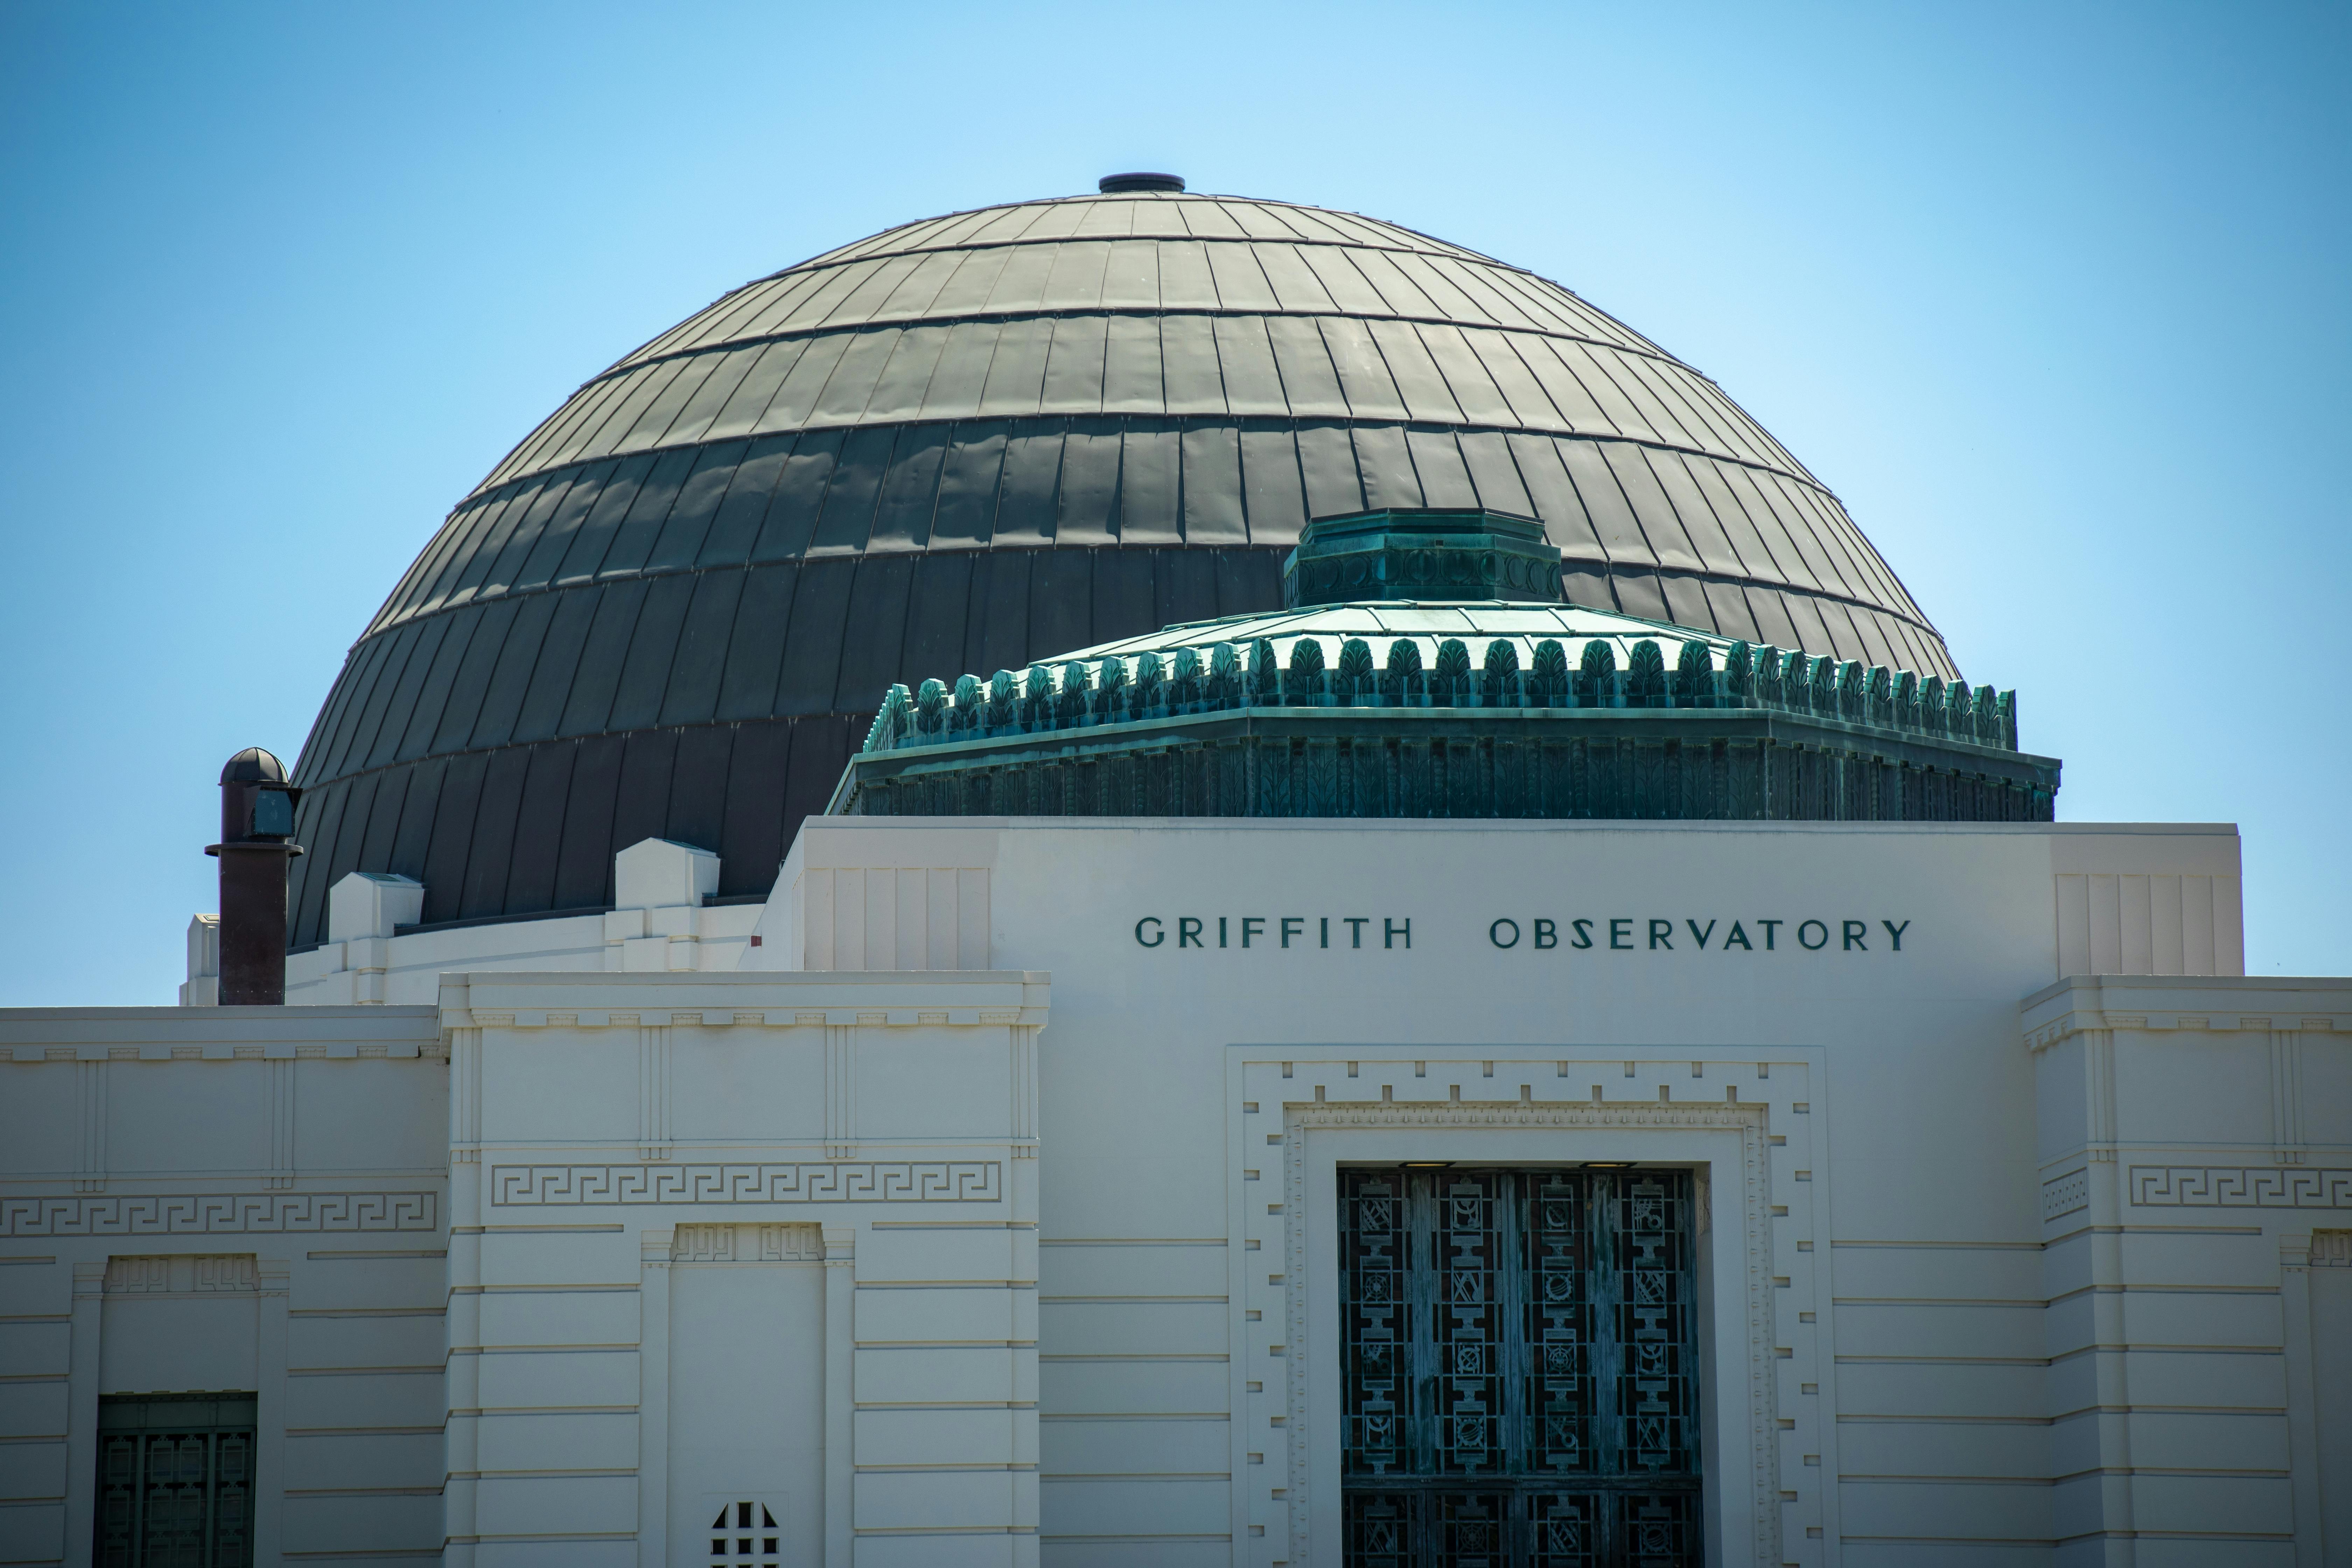 Observatory griffith Griffith Observatory